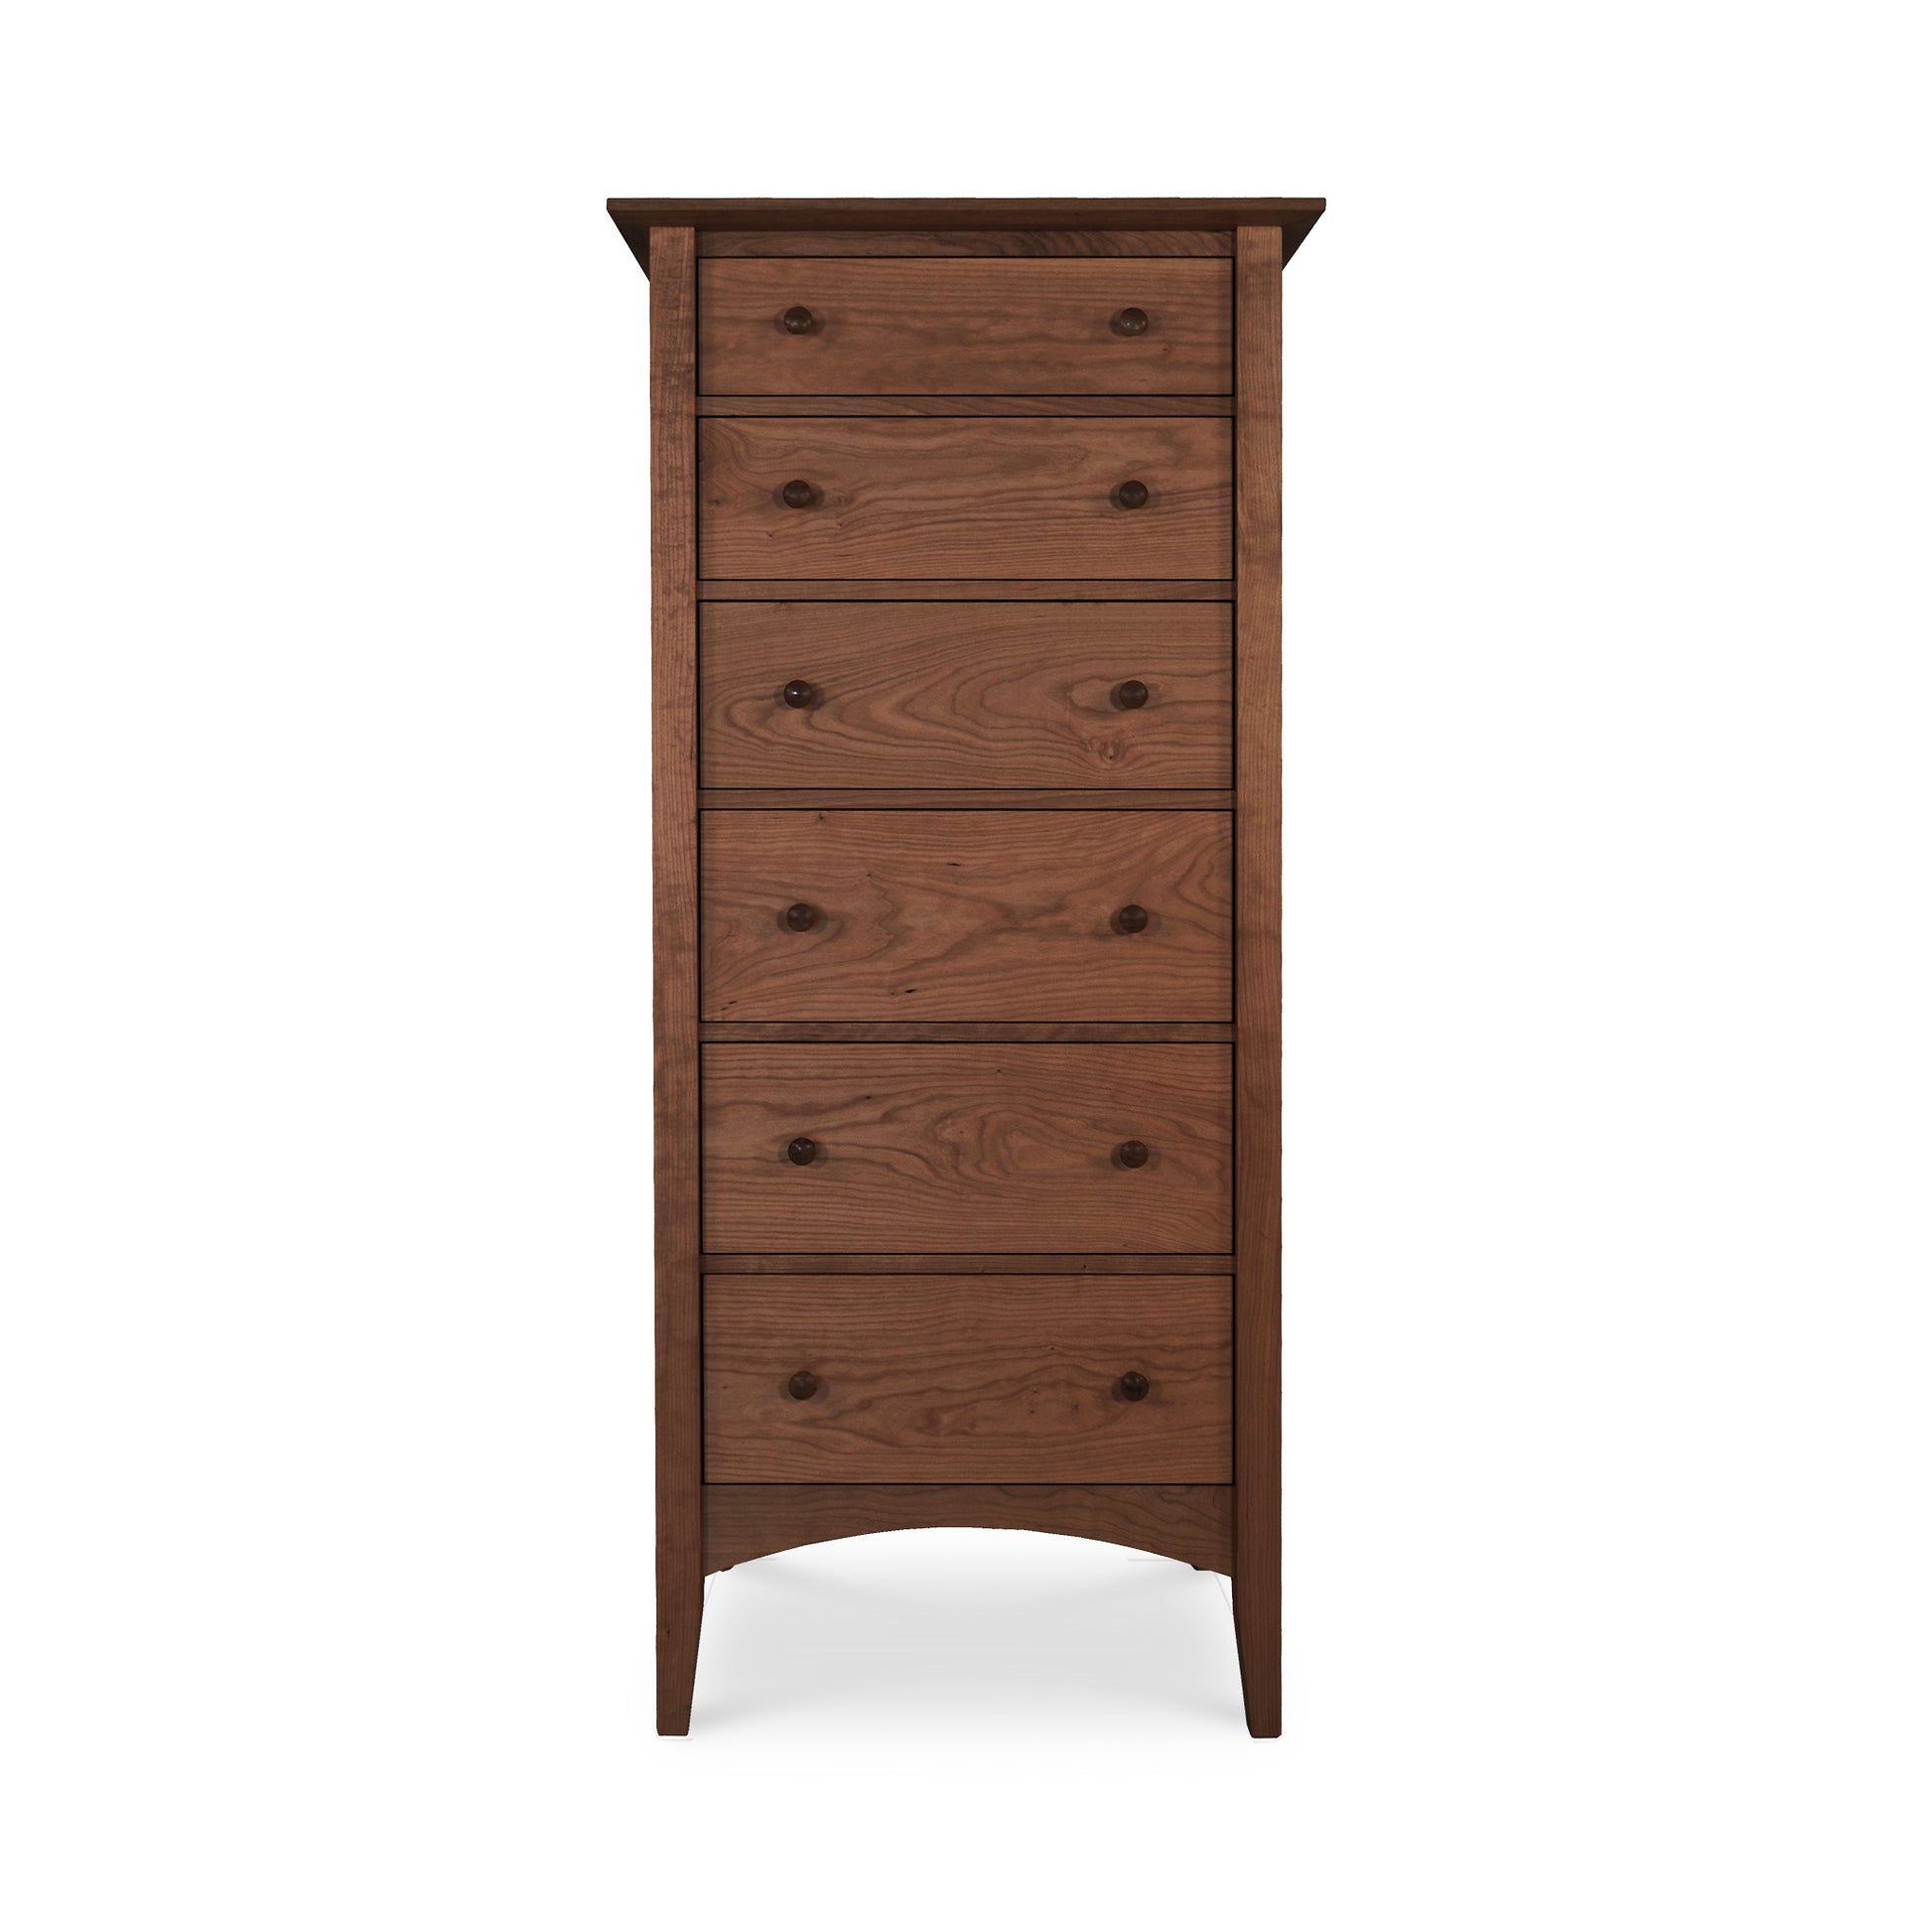 A tall, narrow American Shaker Lingerie Chest with five drawers, featuring a simple design and a rich brown finish. It is handcrafted by Maple Corner Woodworks and set against a plain white background.